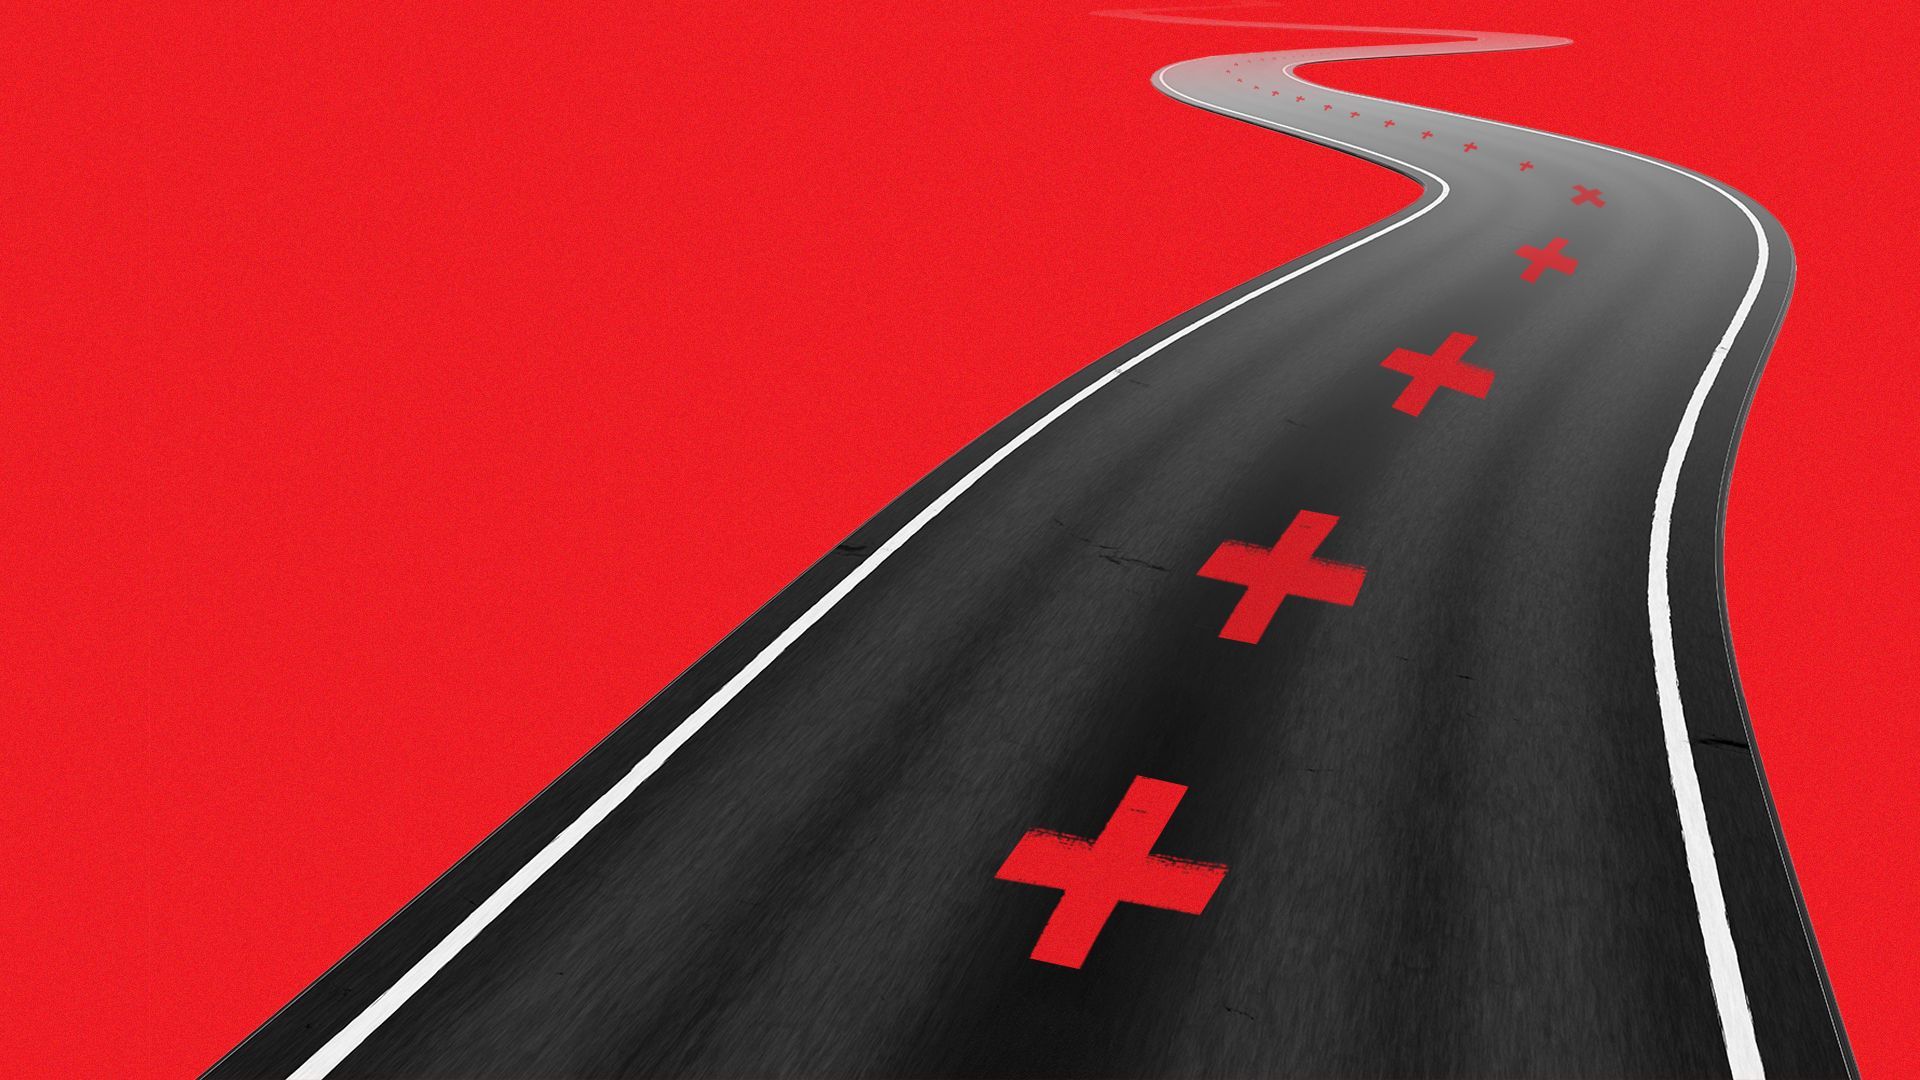 Illustration of a long, winding road with red health crosses painted down the middle as lane dividers